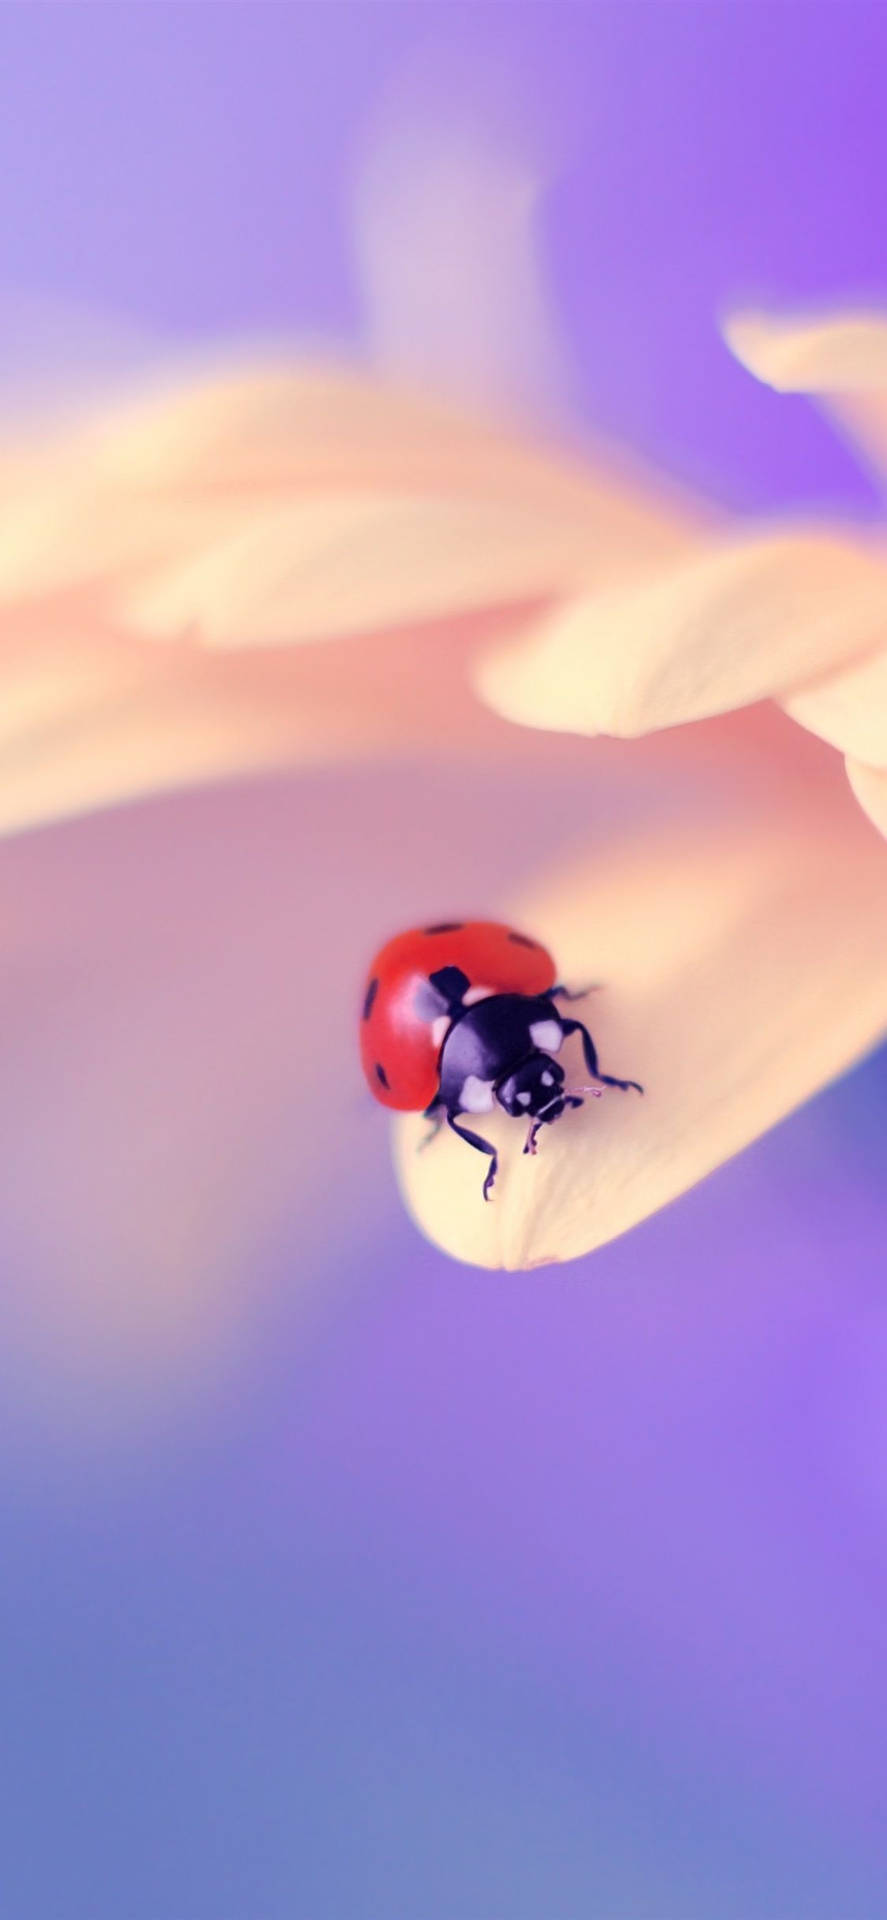 Ladybug Beetle Insect On A Flower Wallpaper